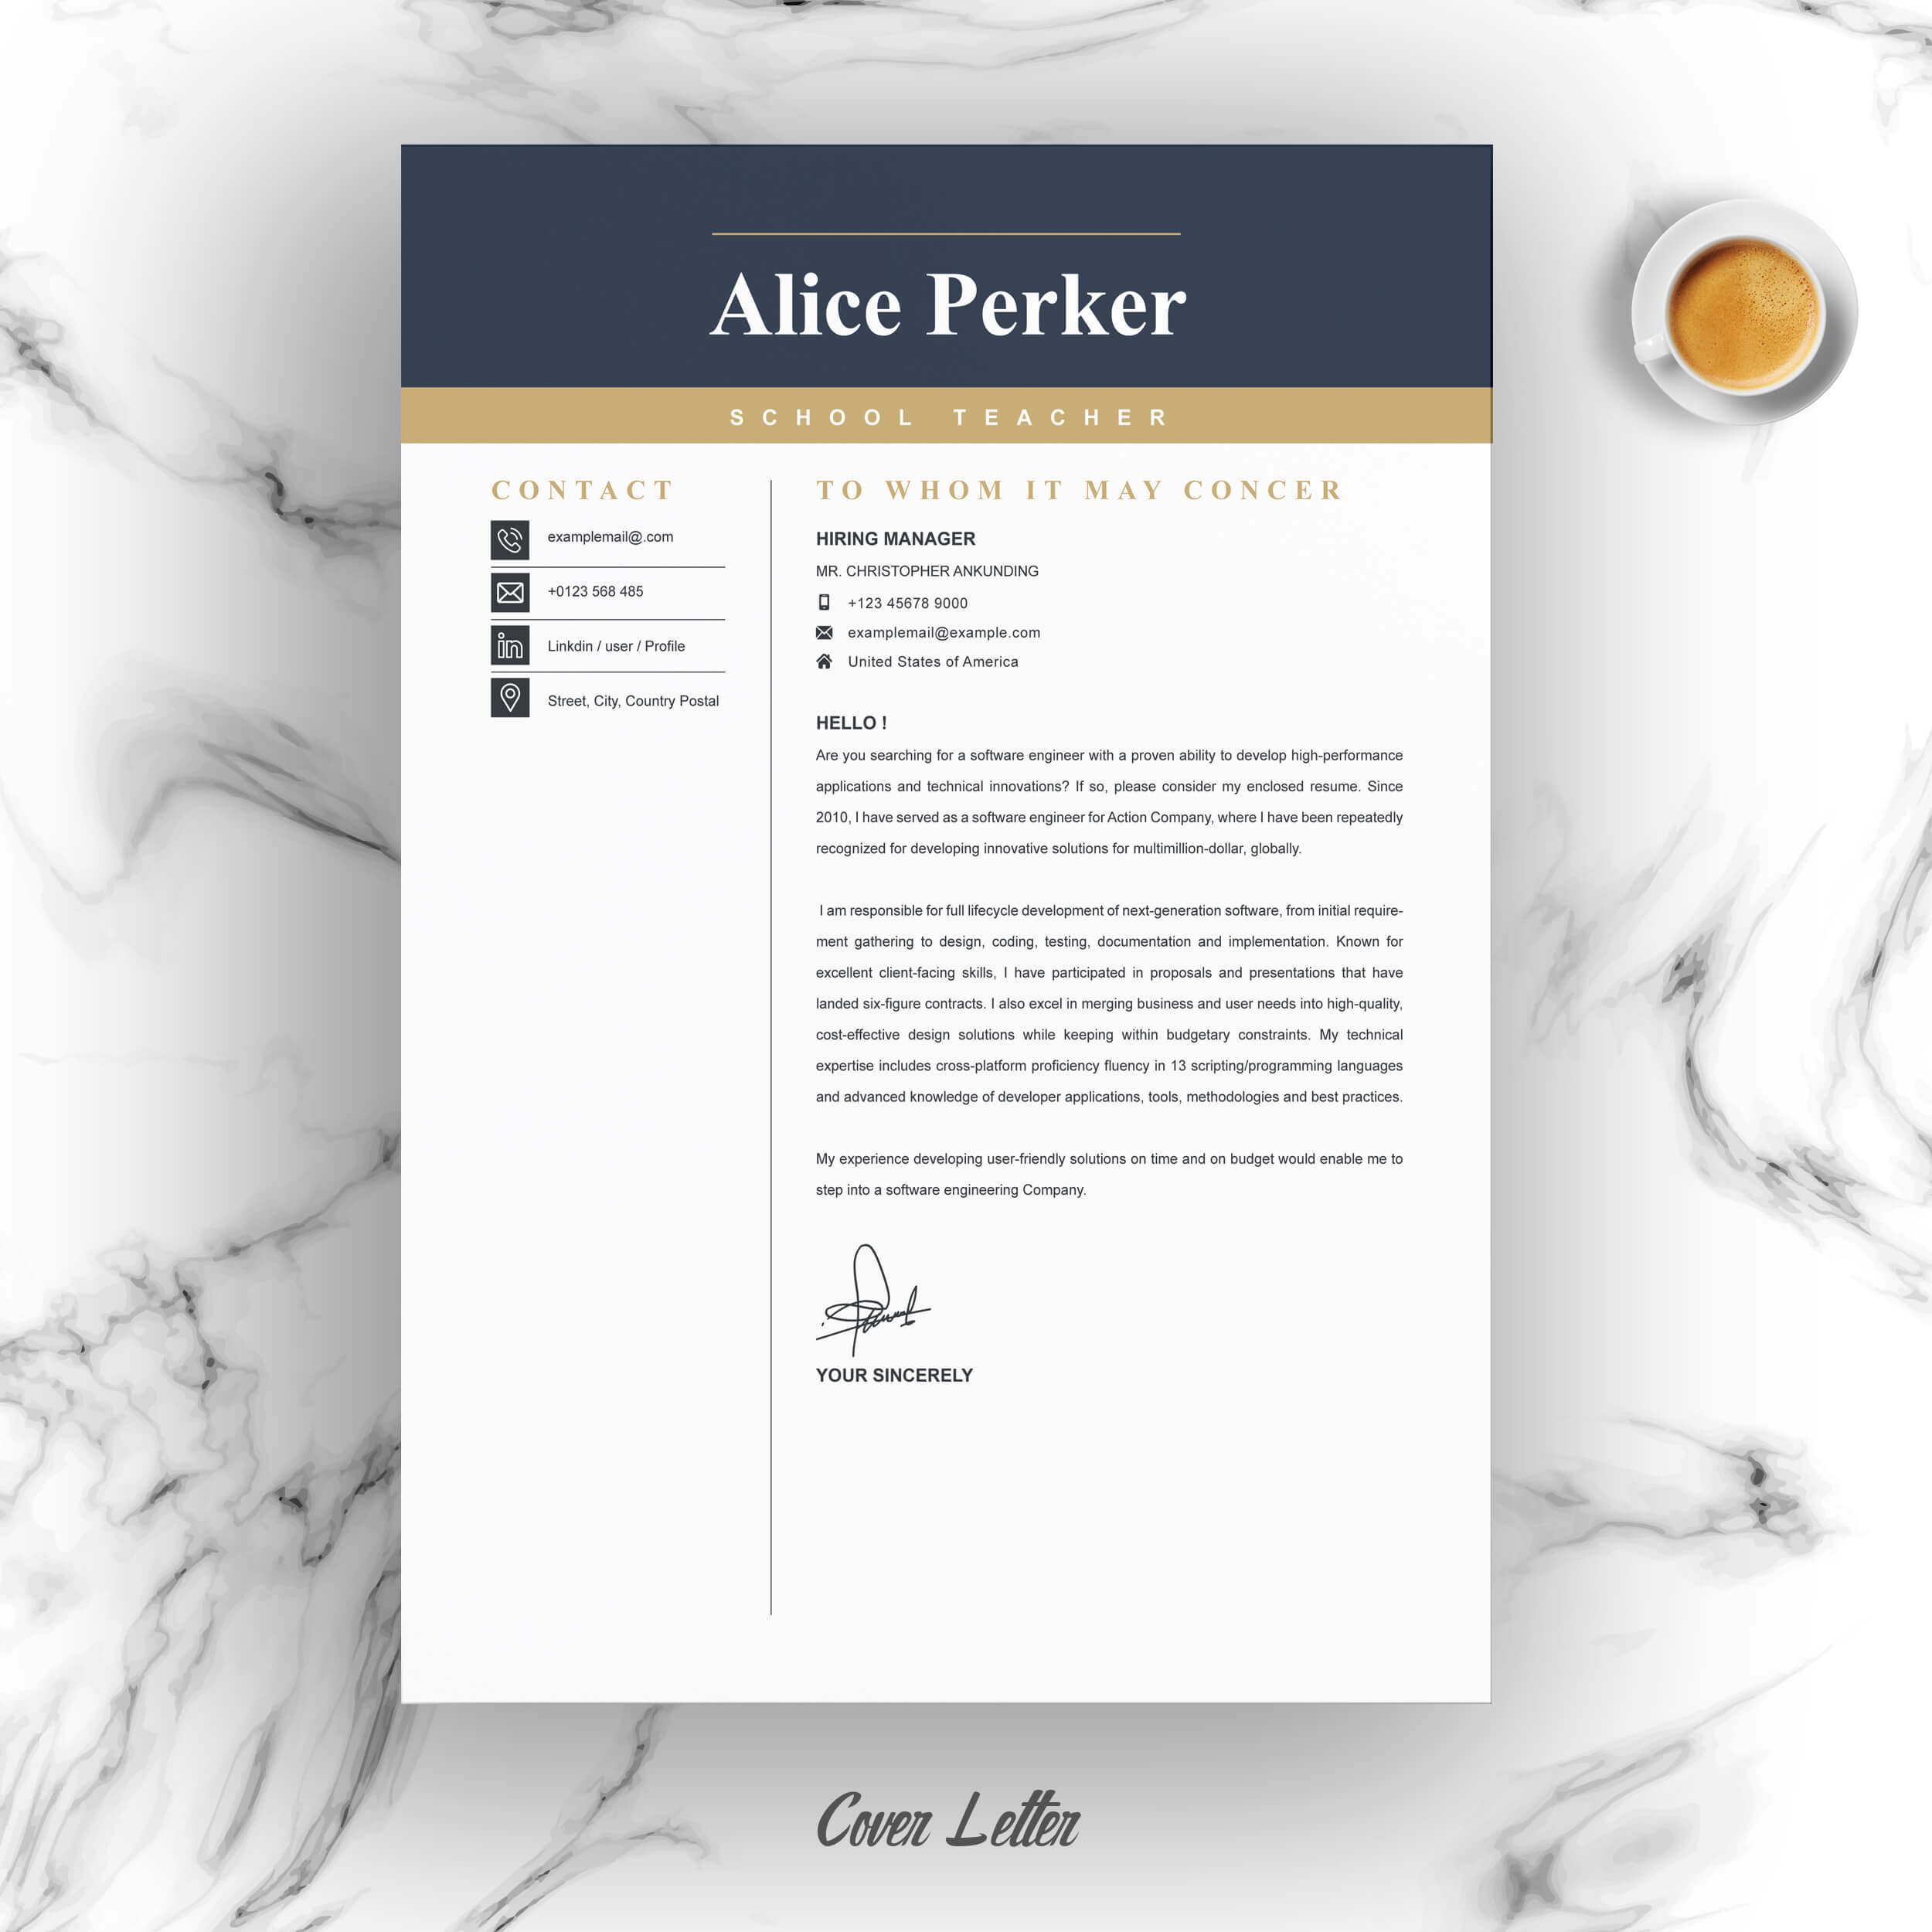 04 resume cover letter page free resume design template 18 223